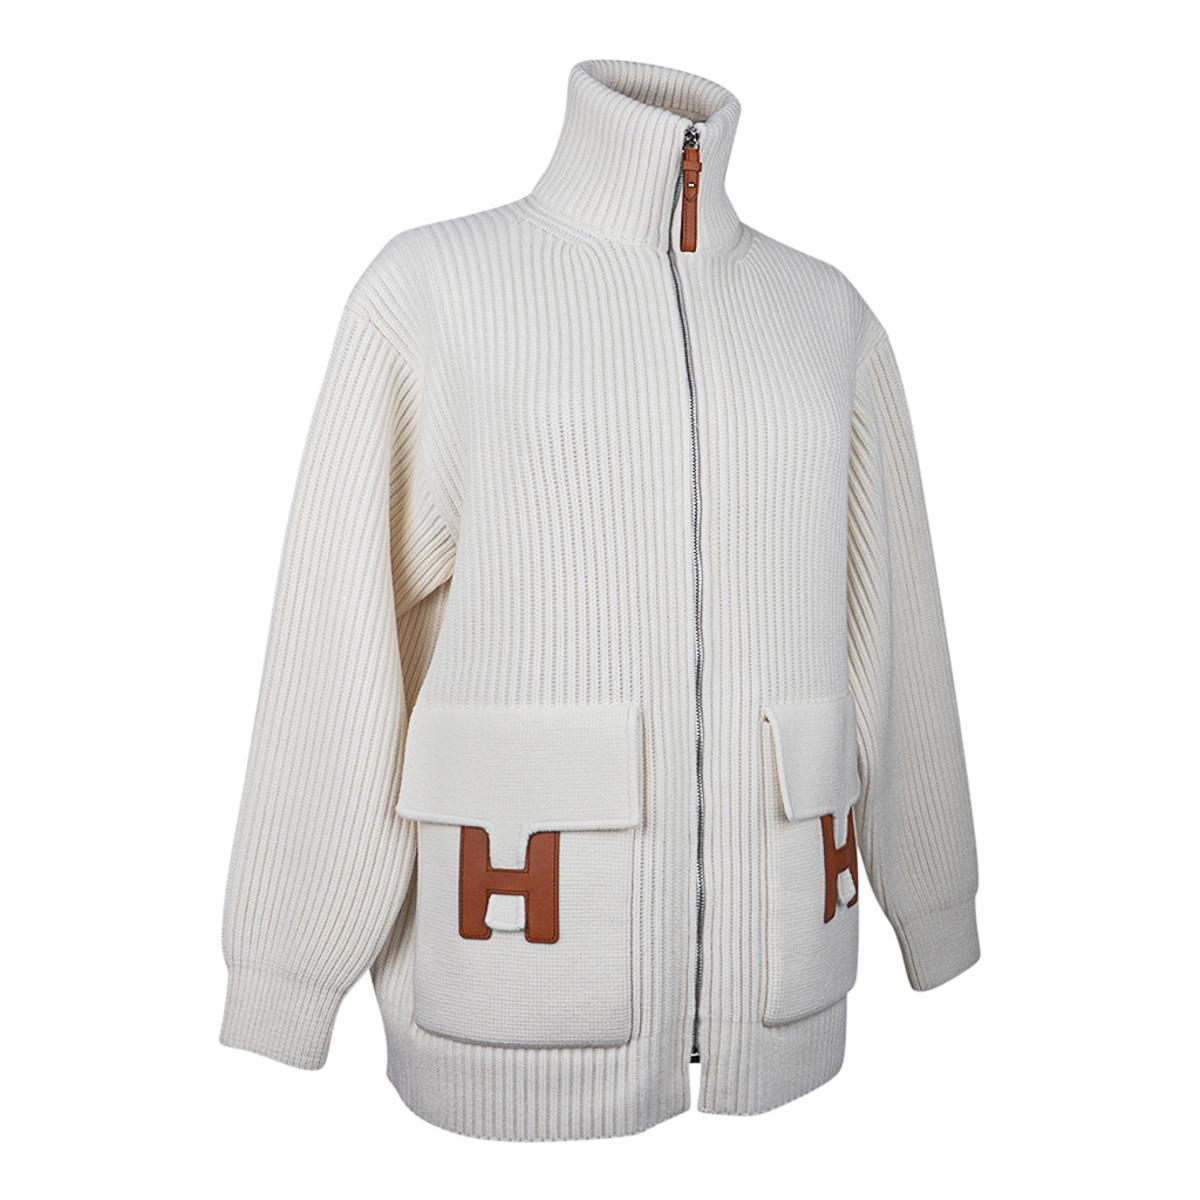 Mightychic offers an Hermès Zip Cardigan featured in Winter White.
High neck zip front with Fauve leather pull.
2 front patch pockets with Bold H in Fauve leather.
A sophisticated collegiate feel.
Fabulous and rare to find - sold out!
Fabric is